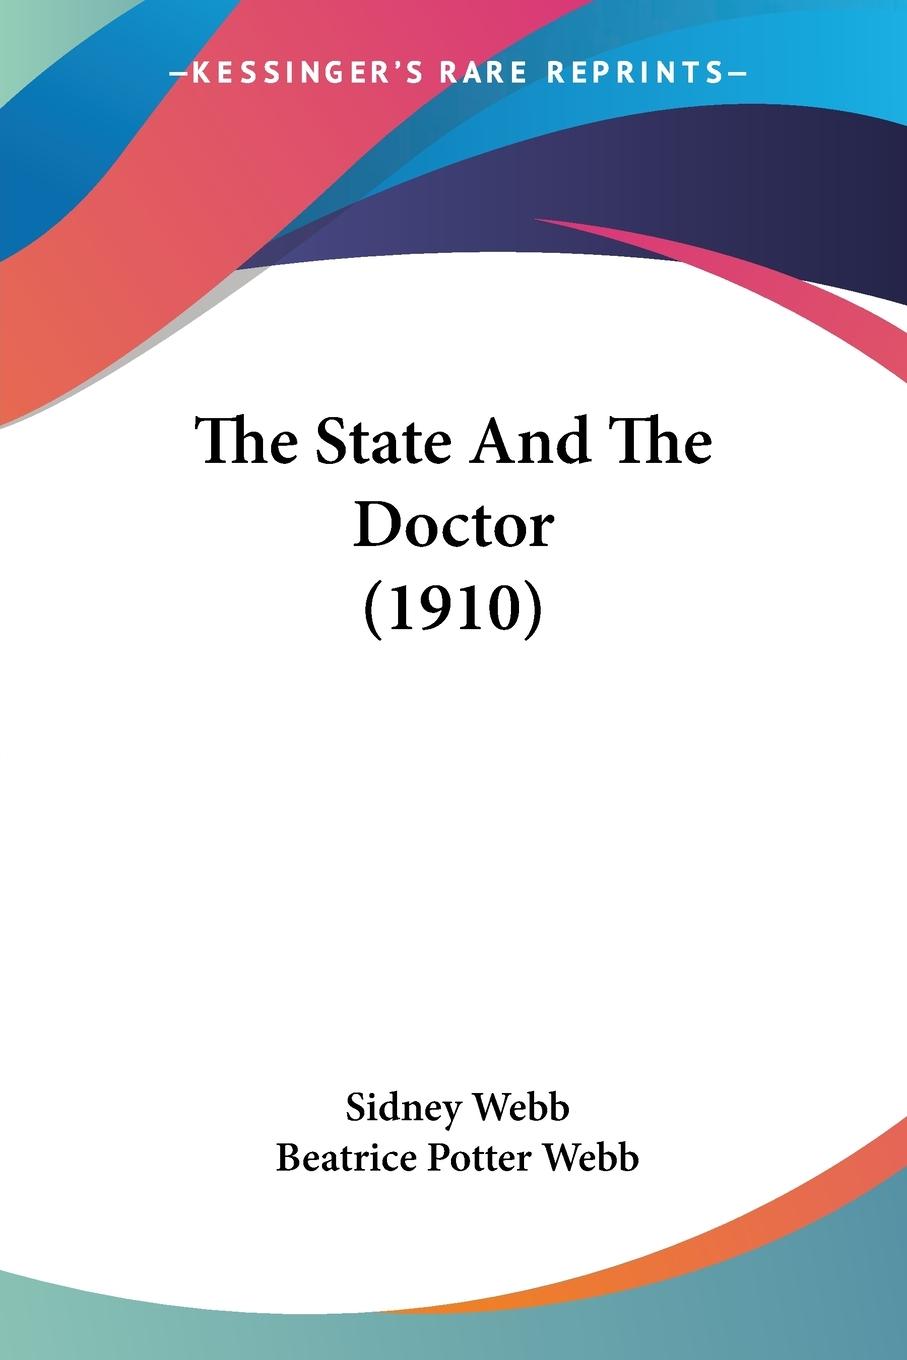 The State And The Doctor (1910) - Webb, Sidney Webb, Beatrice Potter